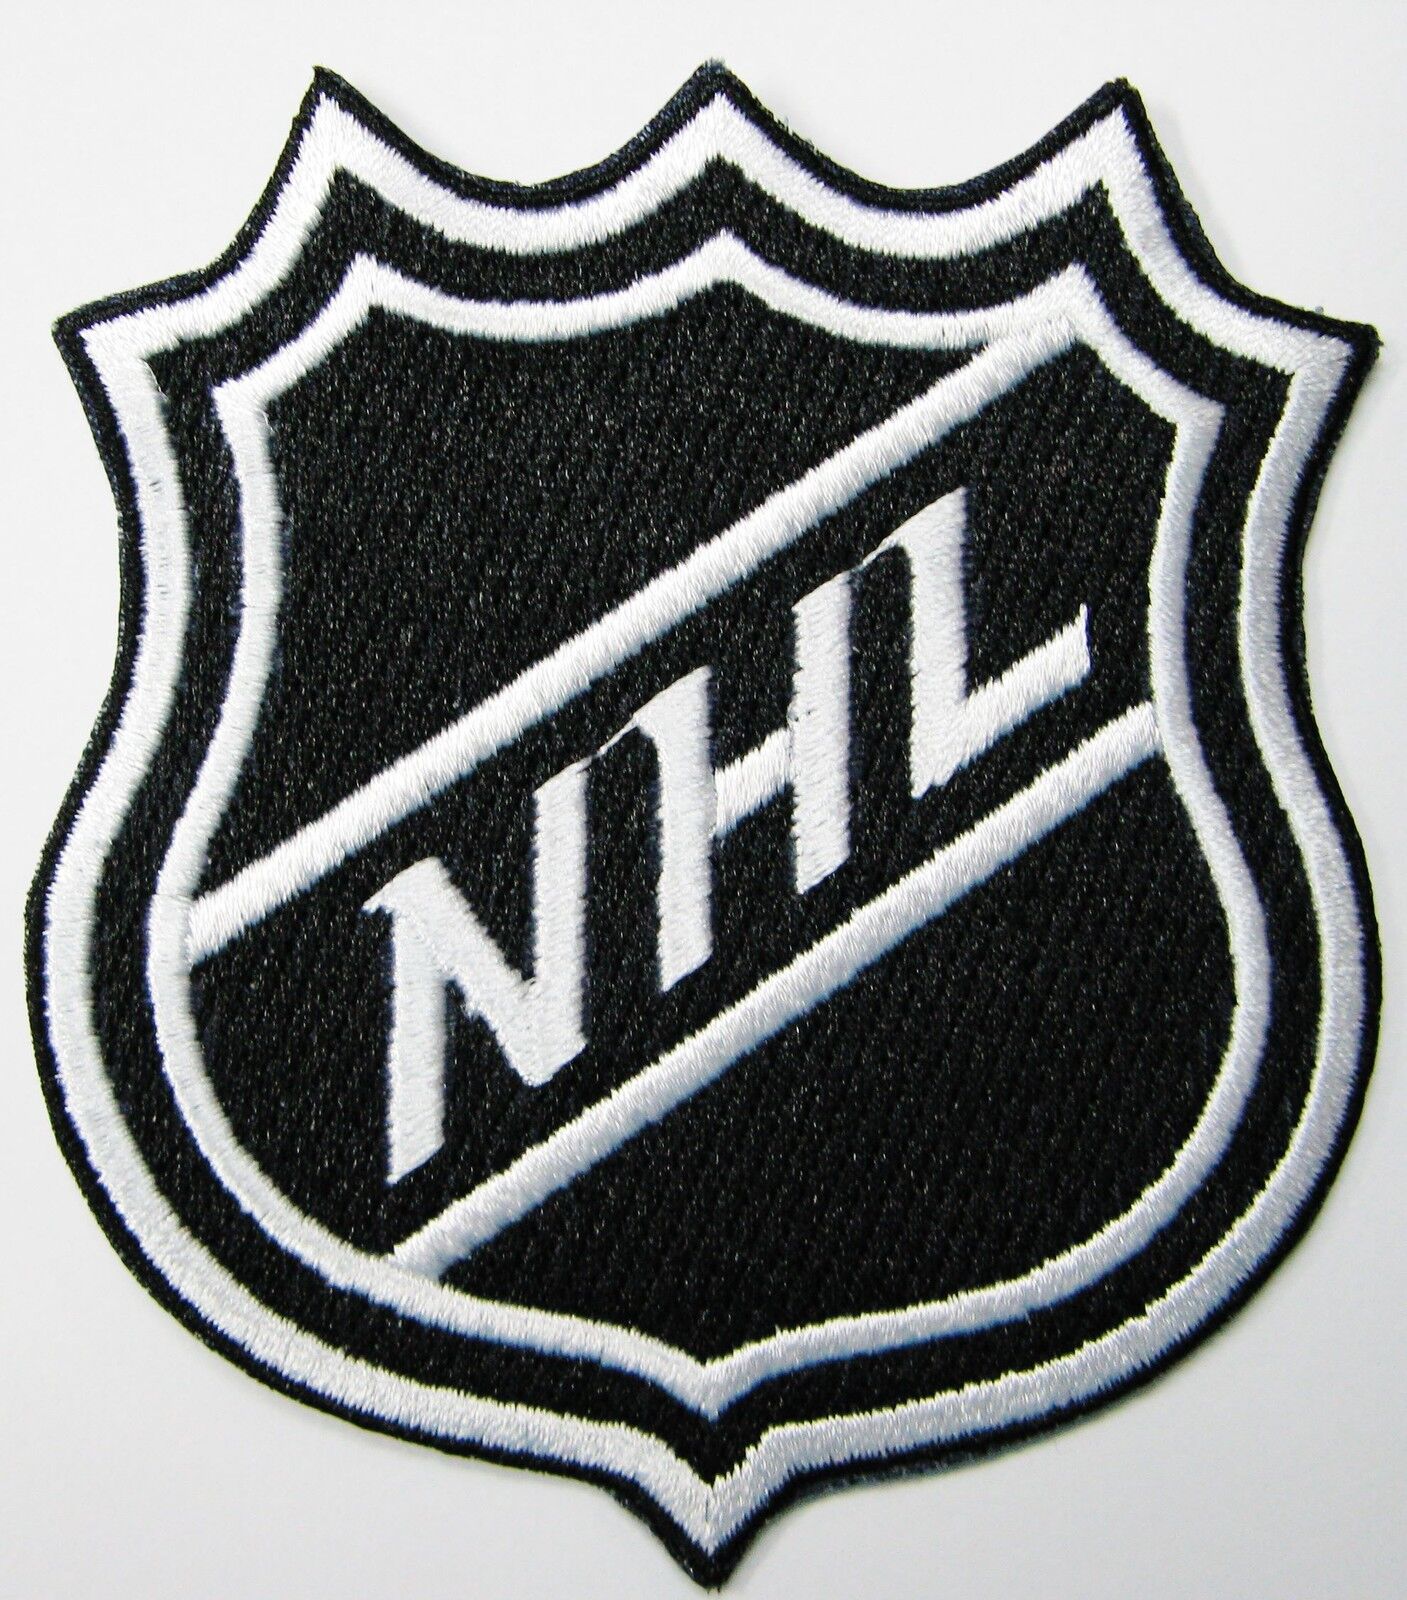 LOT OF (1) NATIONAL HOCKEY LEAGUE BADGE (NHL) EMBROIDERED PATCH ITEM # 82